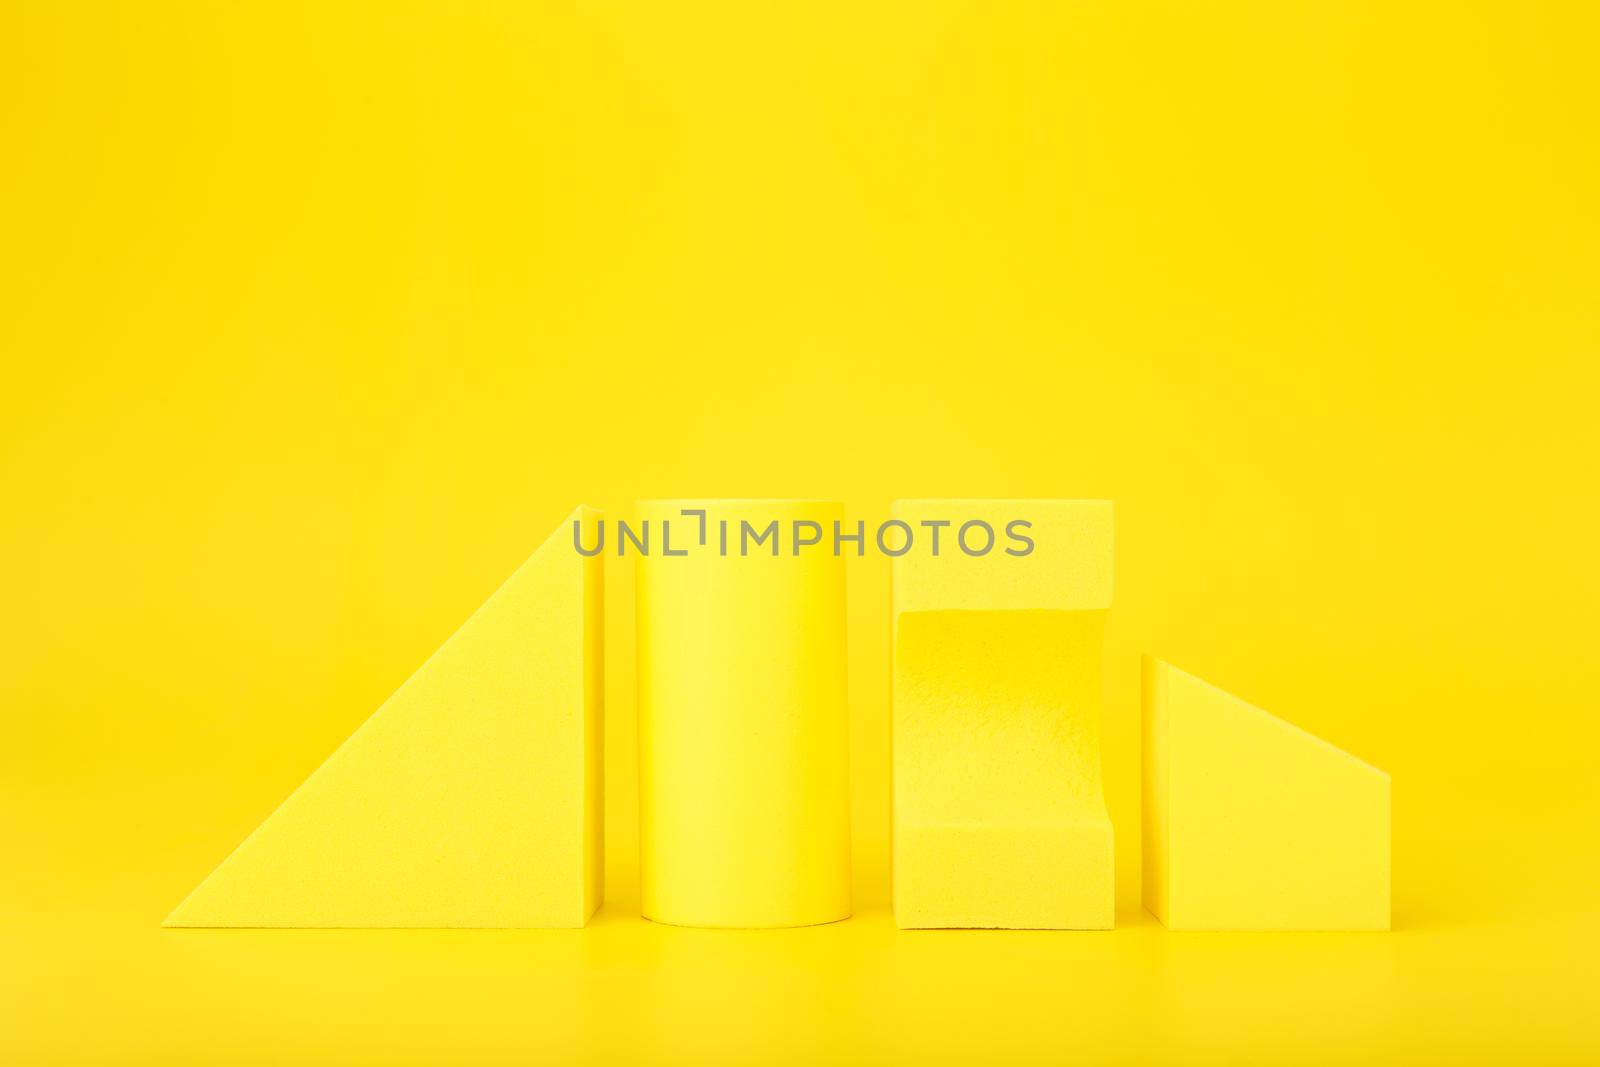 Abstract trendy futuristic background in monochromatic yellow colors with copy space. Bright artsy background with yellow geometric shapes against yellow background with copy space